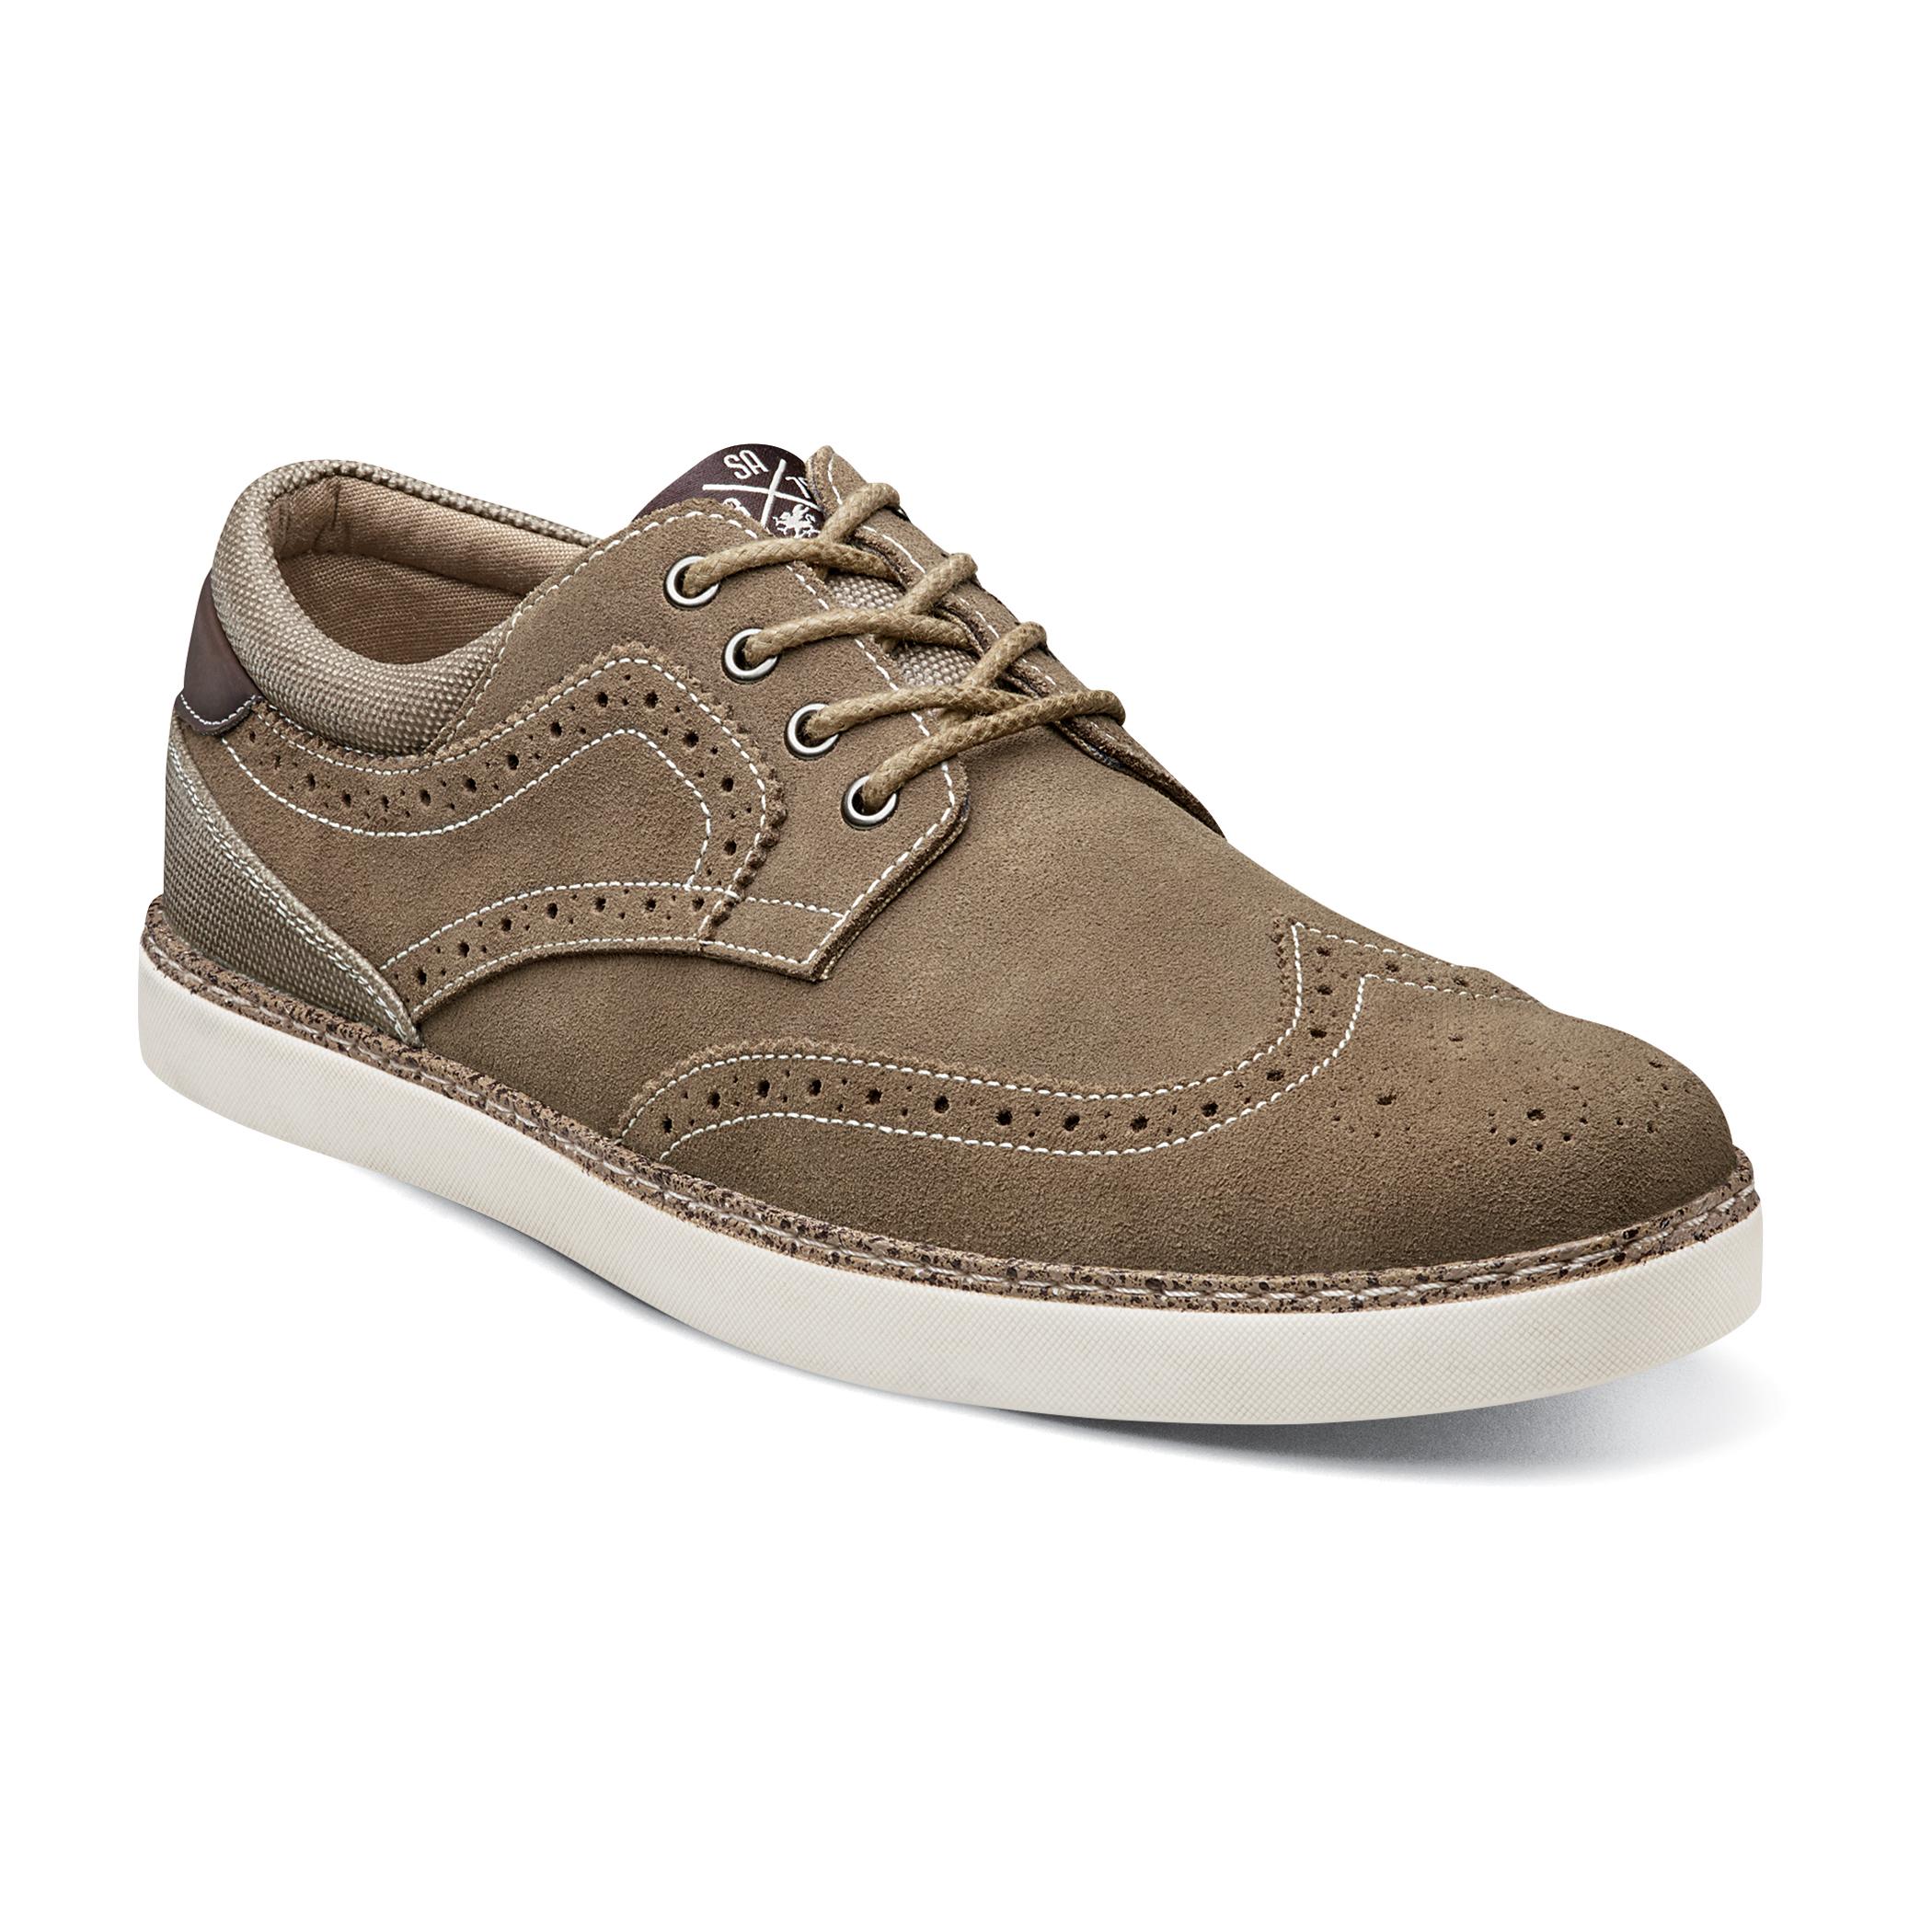 Stacy Adams Taz Stone Suede Wingtip Shoes 53416 - $74.90 :: Upscale ...